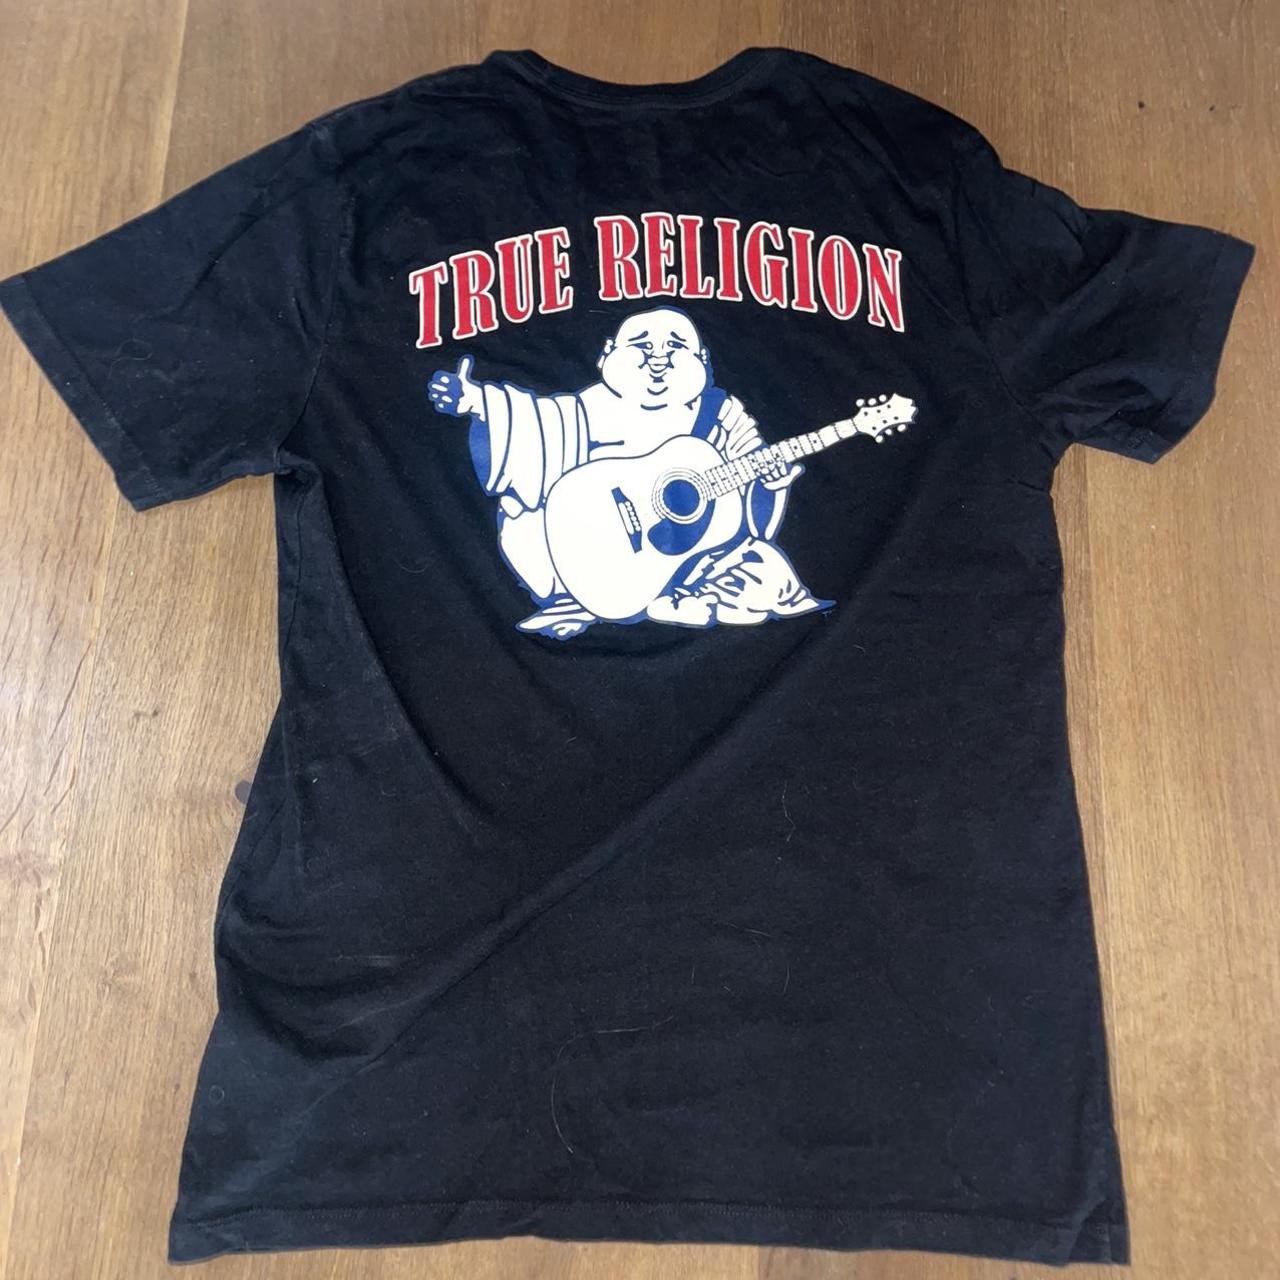 True religion t shirt Size small Selling due to... - Depop